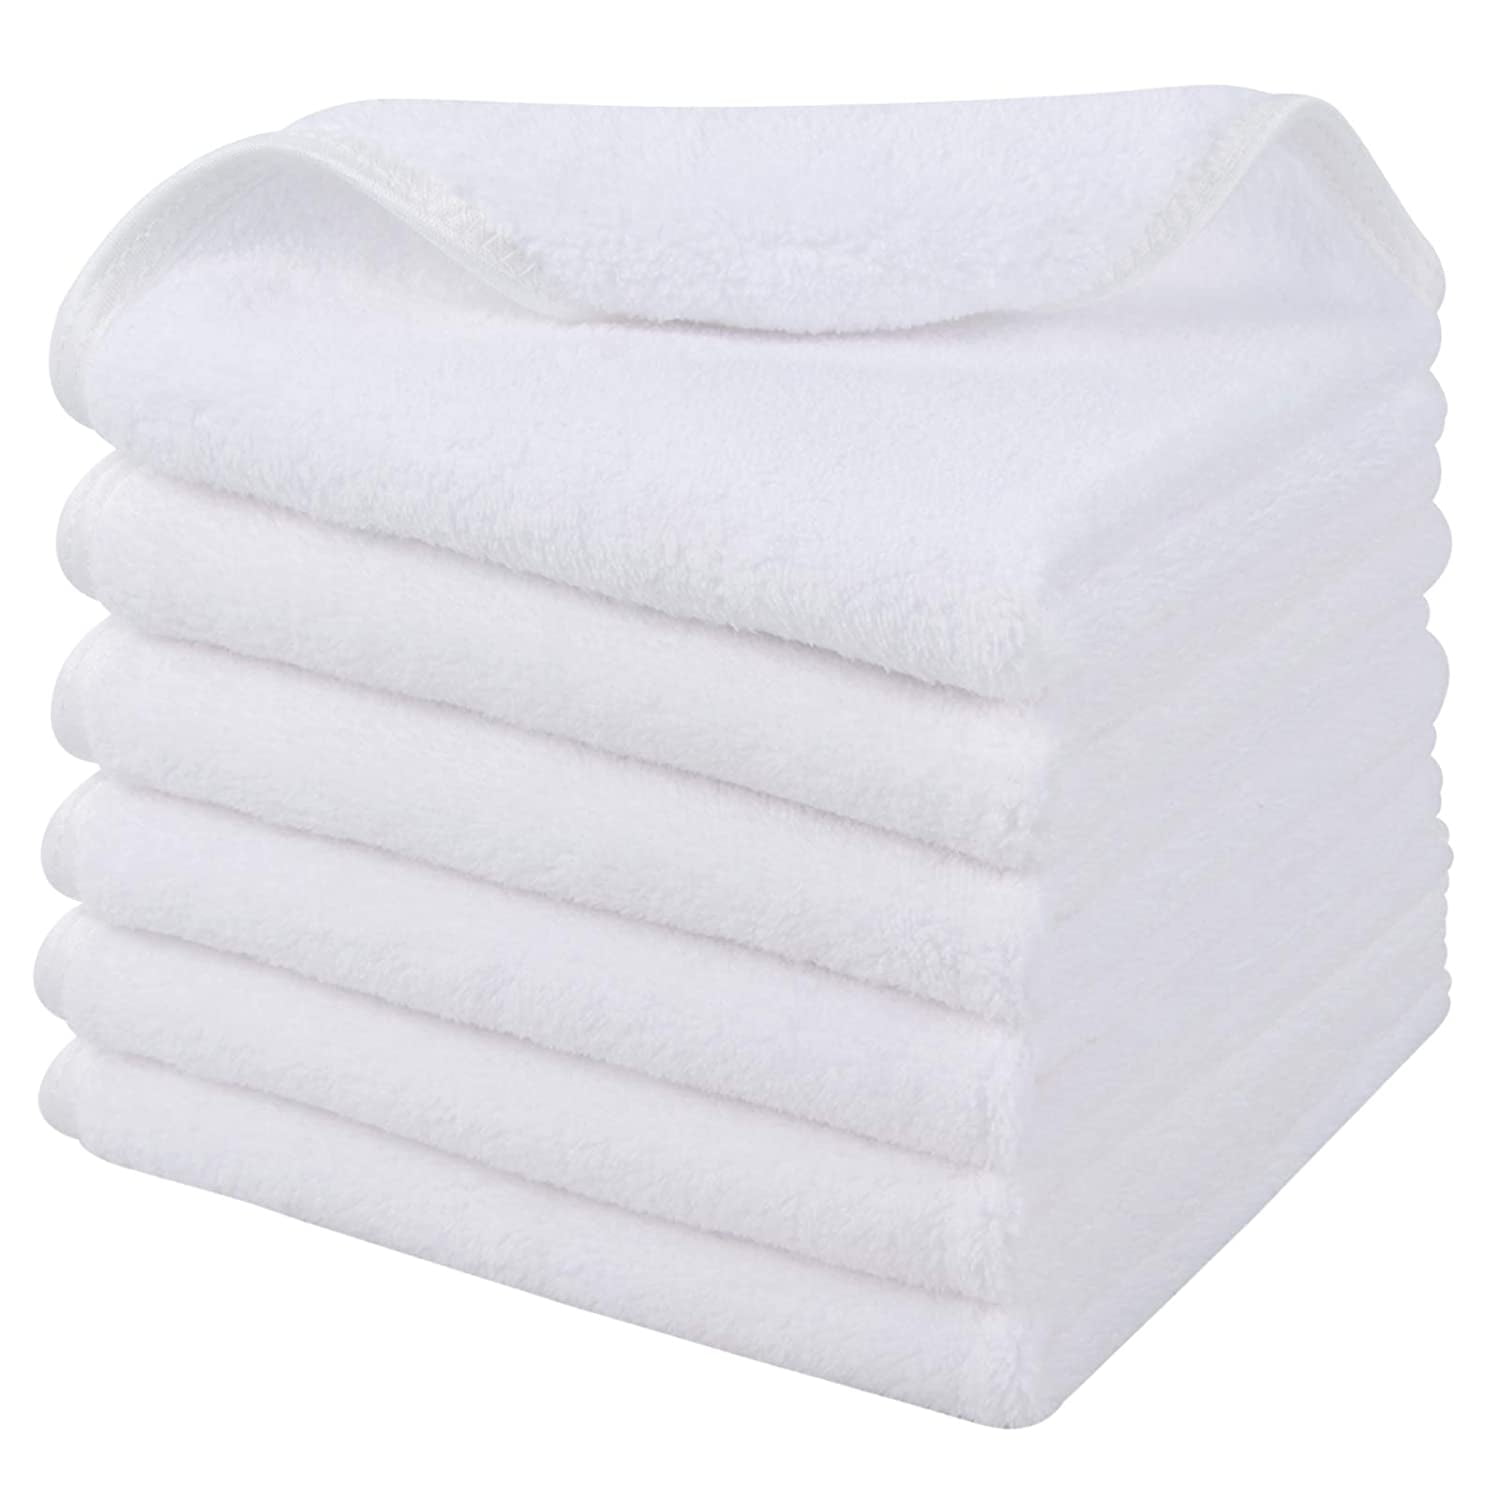 7-Pack 12x12" - Soft Fast Drying Cleanin... Microfiber Face Towels Washcloths 